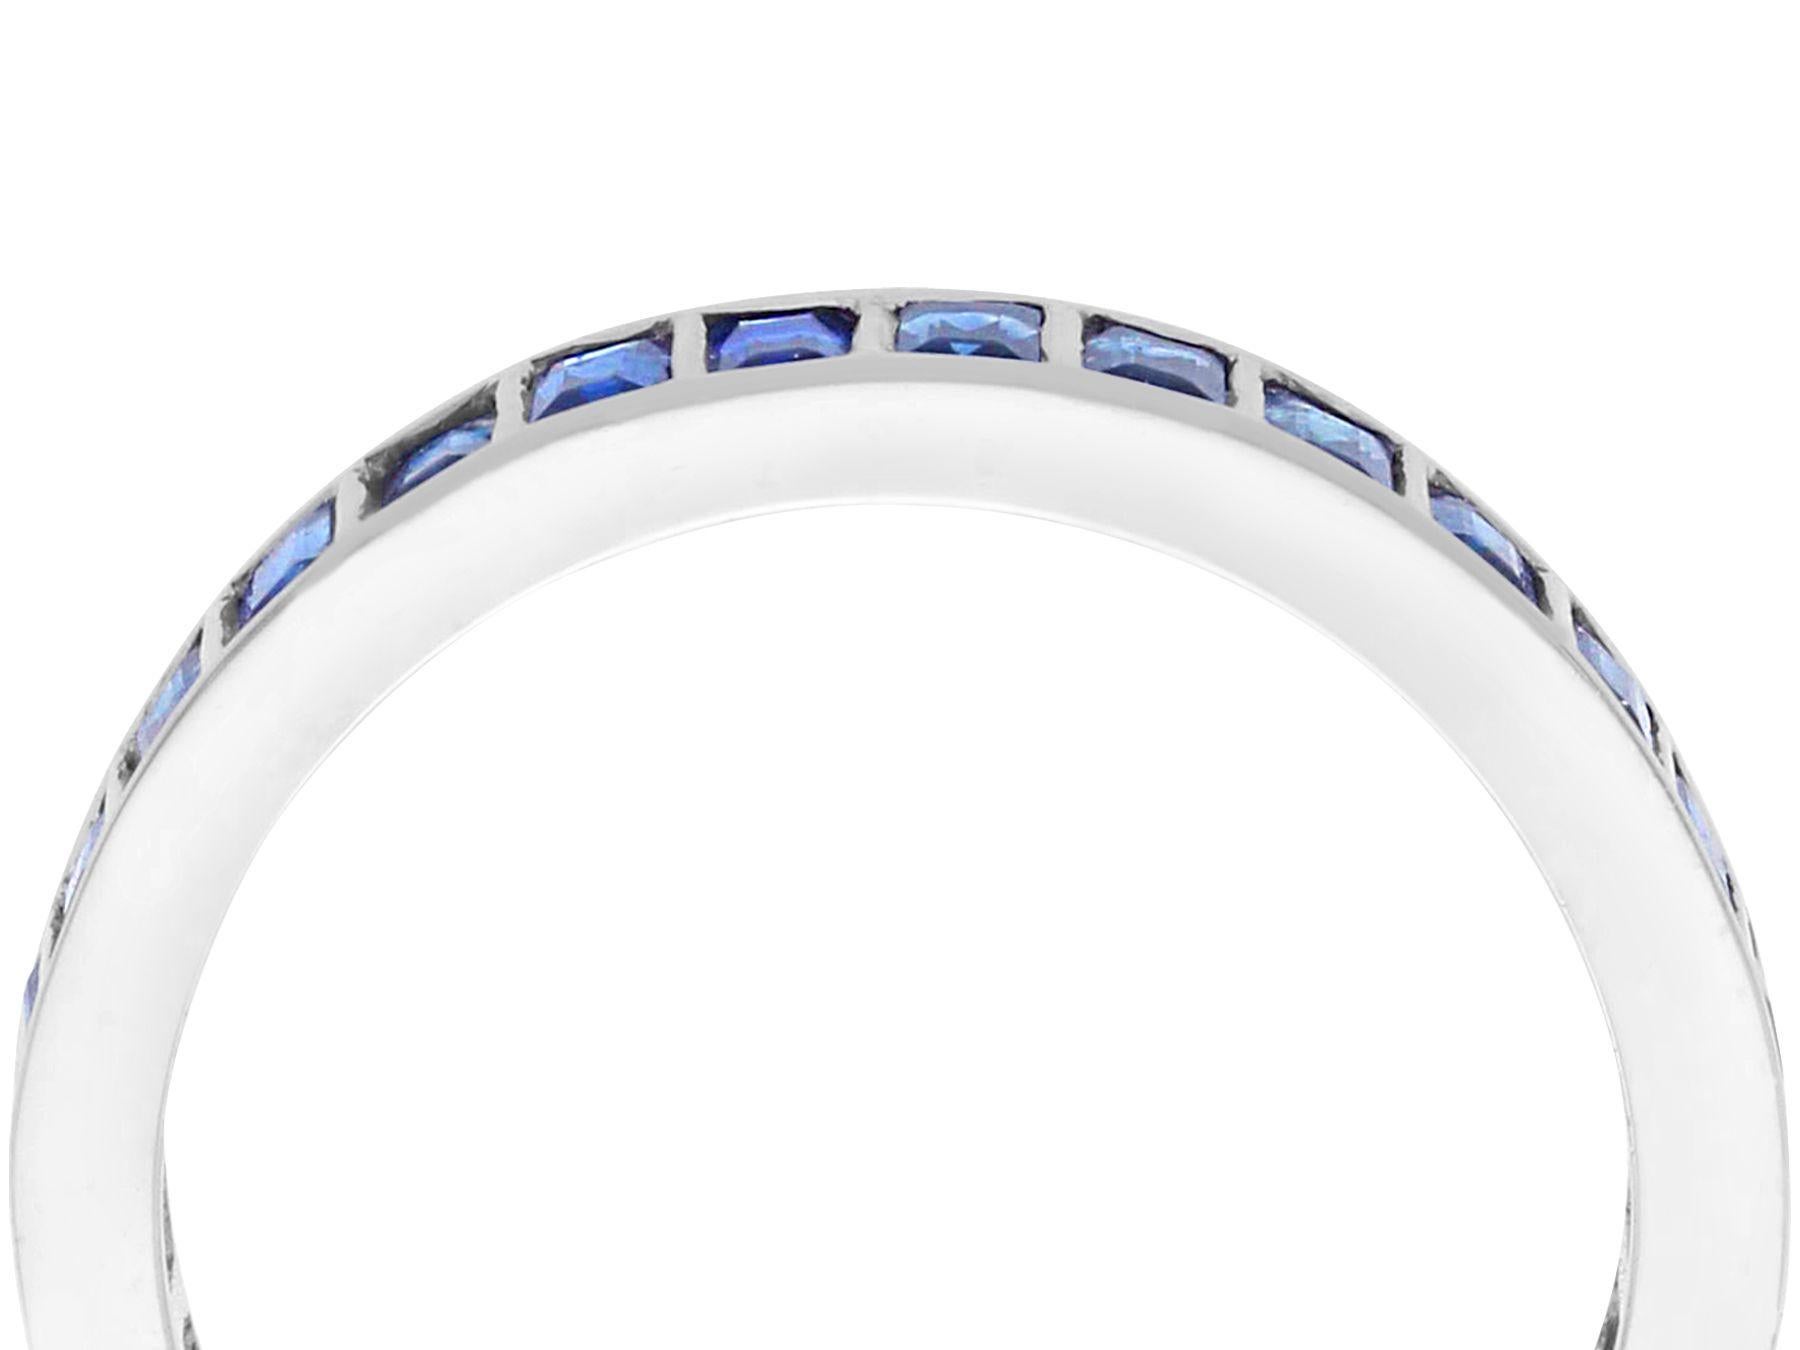 A fine and impressive 1.90 carat sapphire and 18 carat white gold eternity ring; part of our diverse vintage jewelry and estate jewelry collections.

This fine and impressive vintage eternity ring has been crafted in 18ct white gold.

This vintage